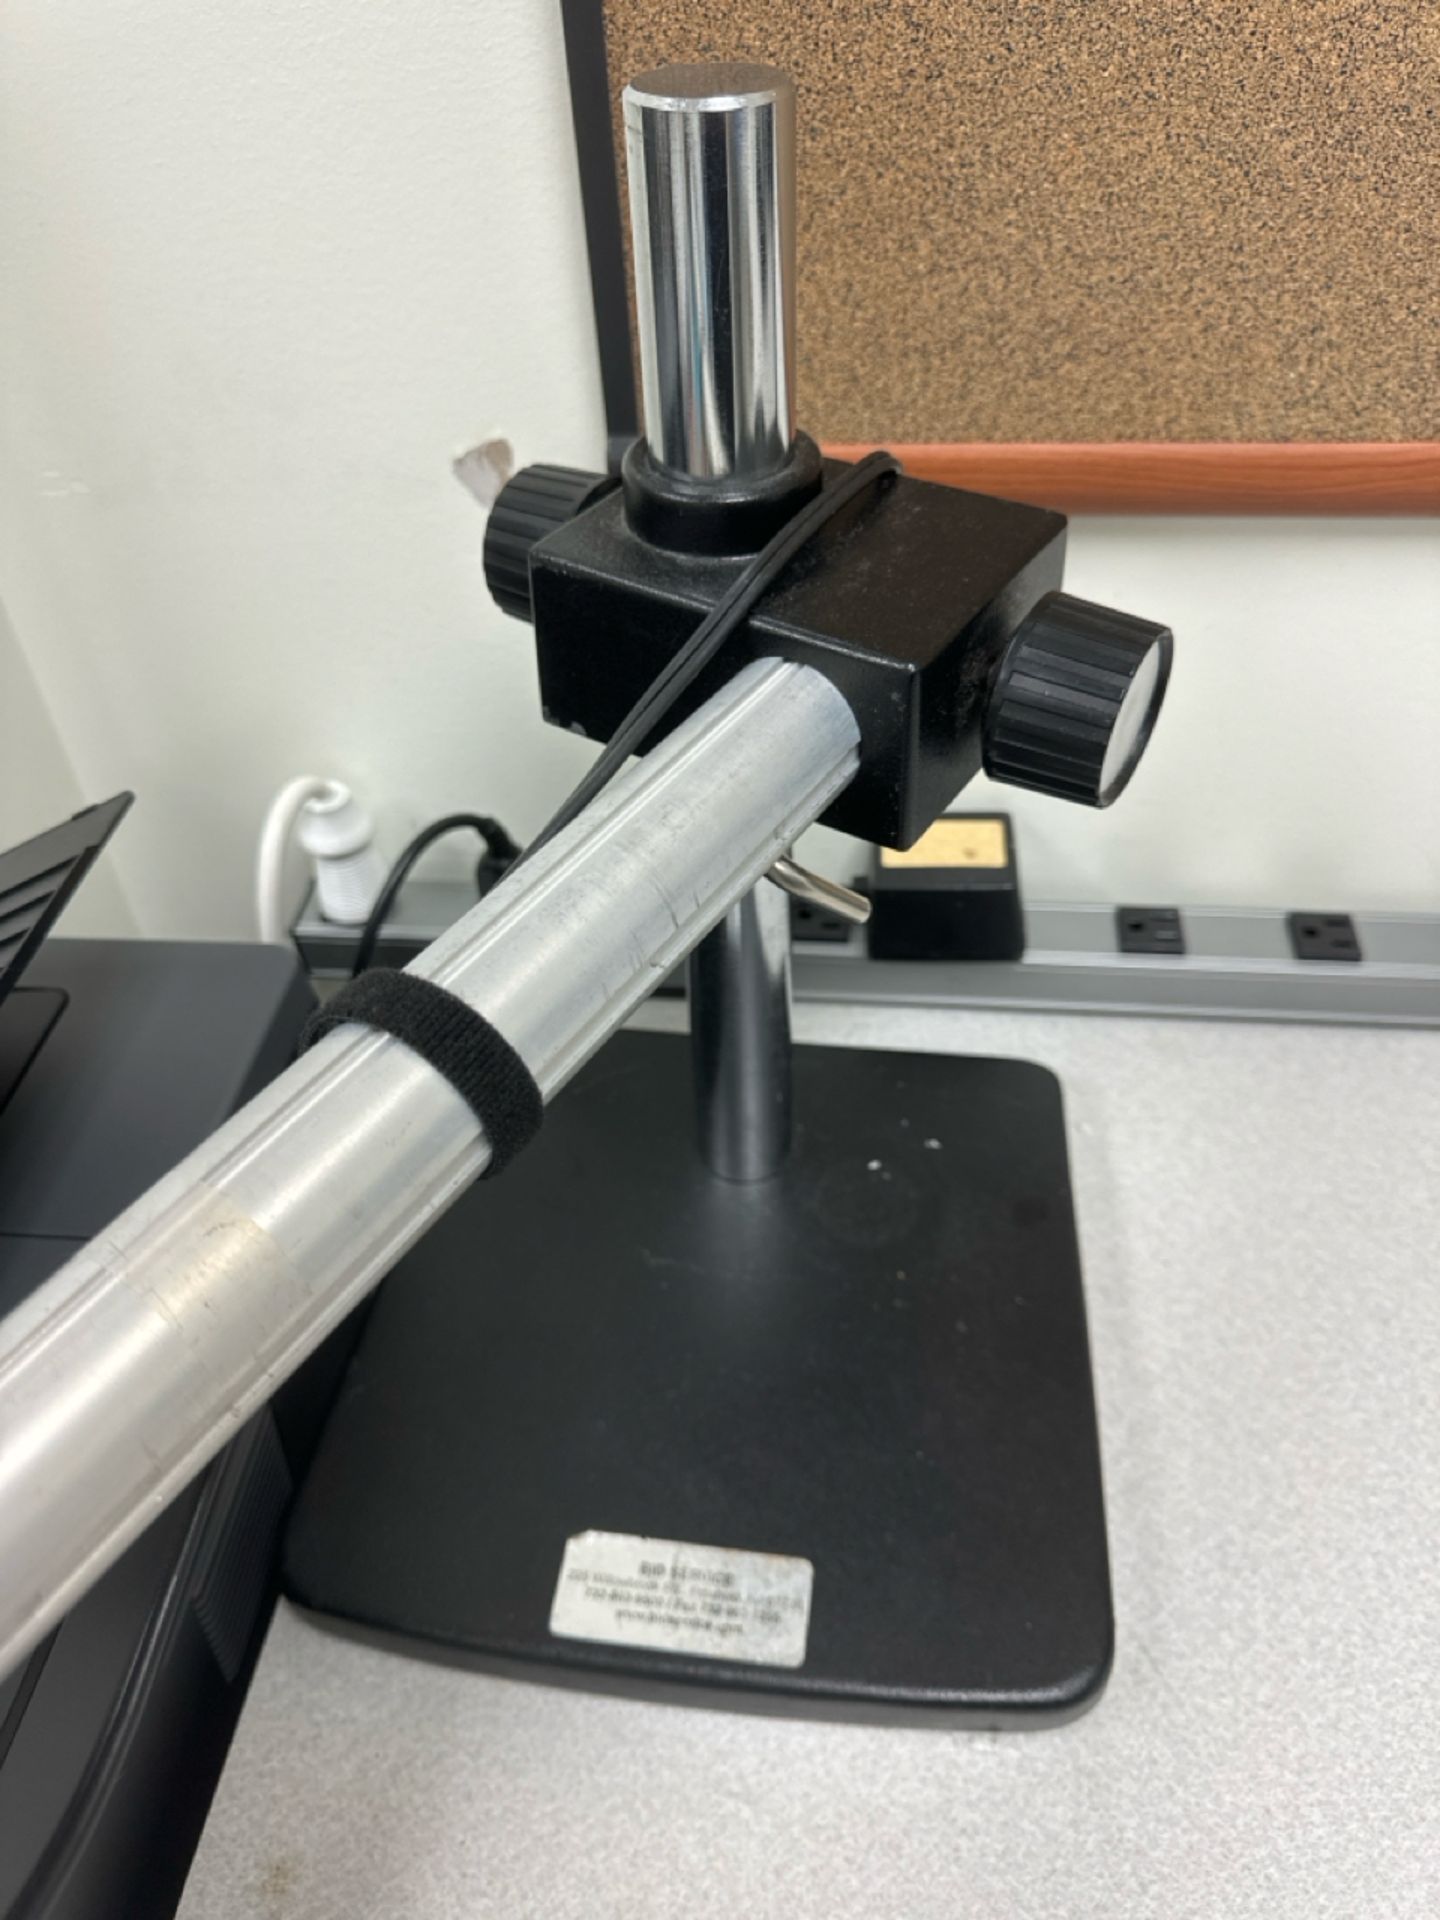 Leica Stereo Zoom 4 Microscope on Boom Stand w/ Rotatable ER Arm - Image 2 of 5